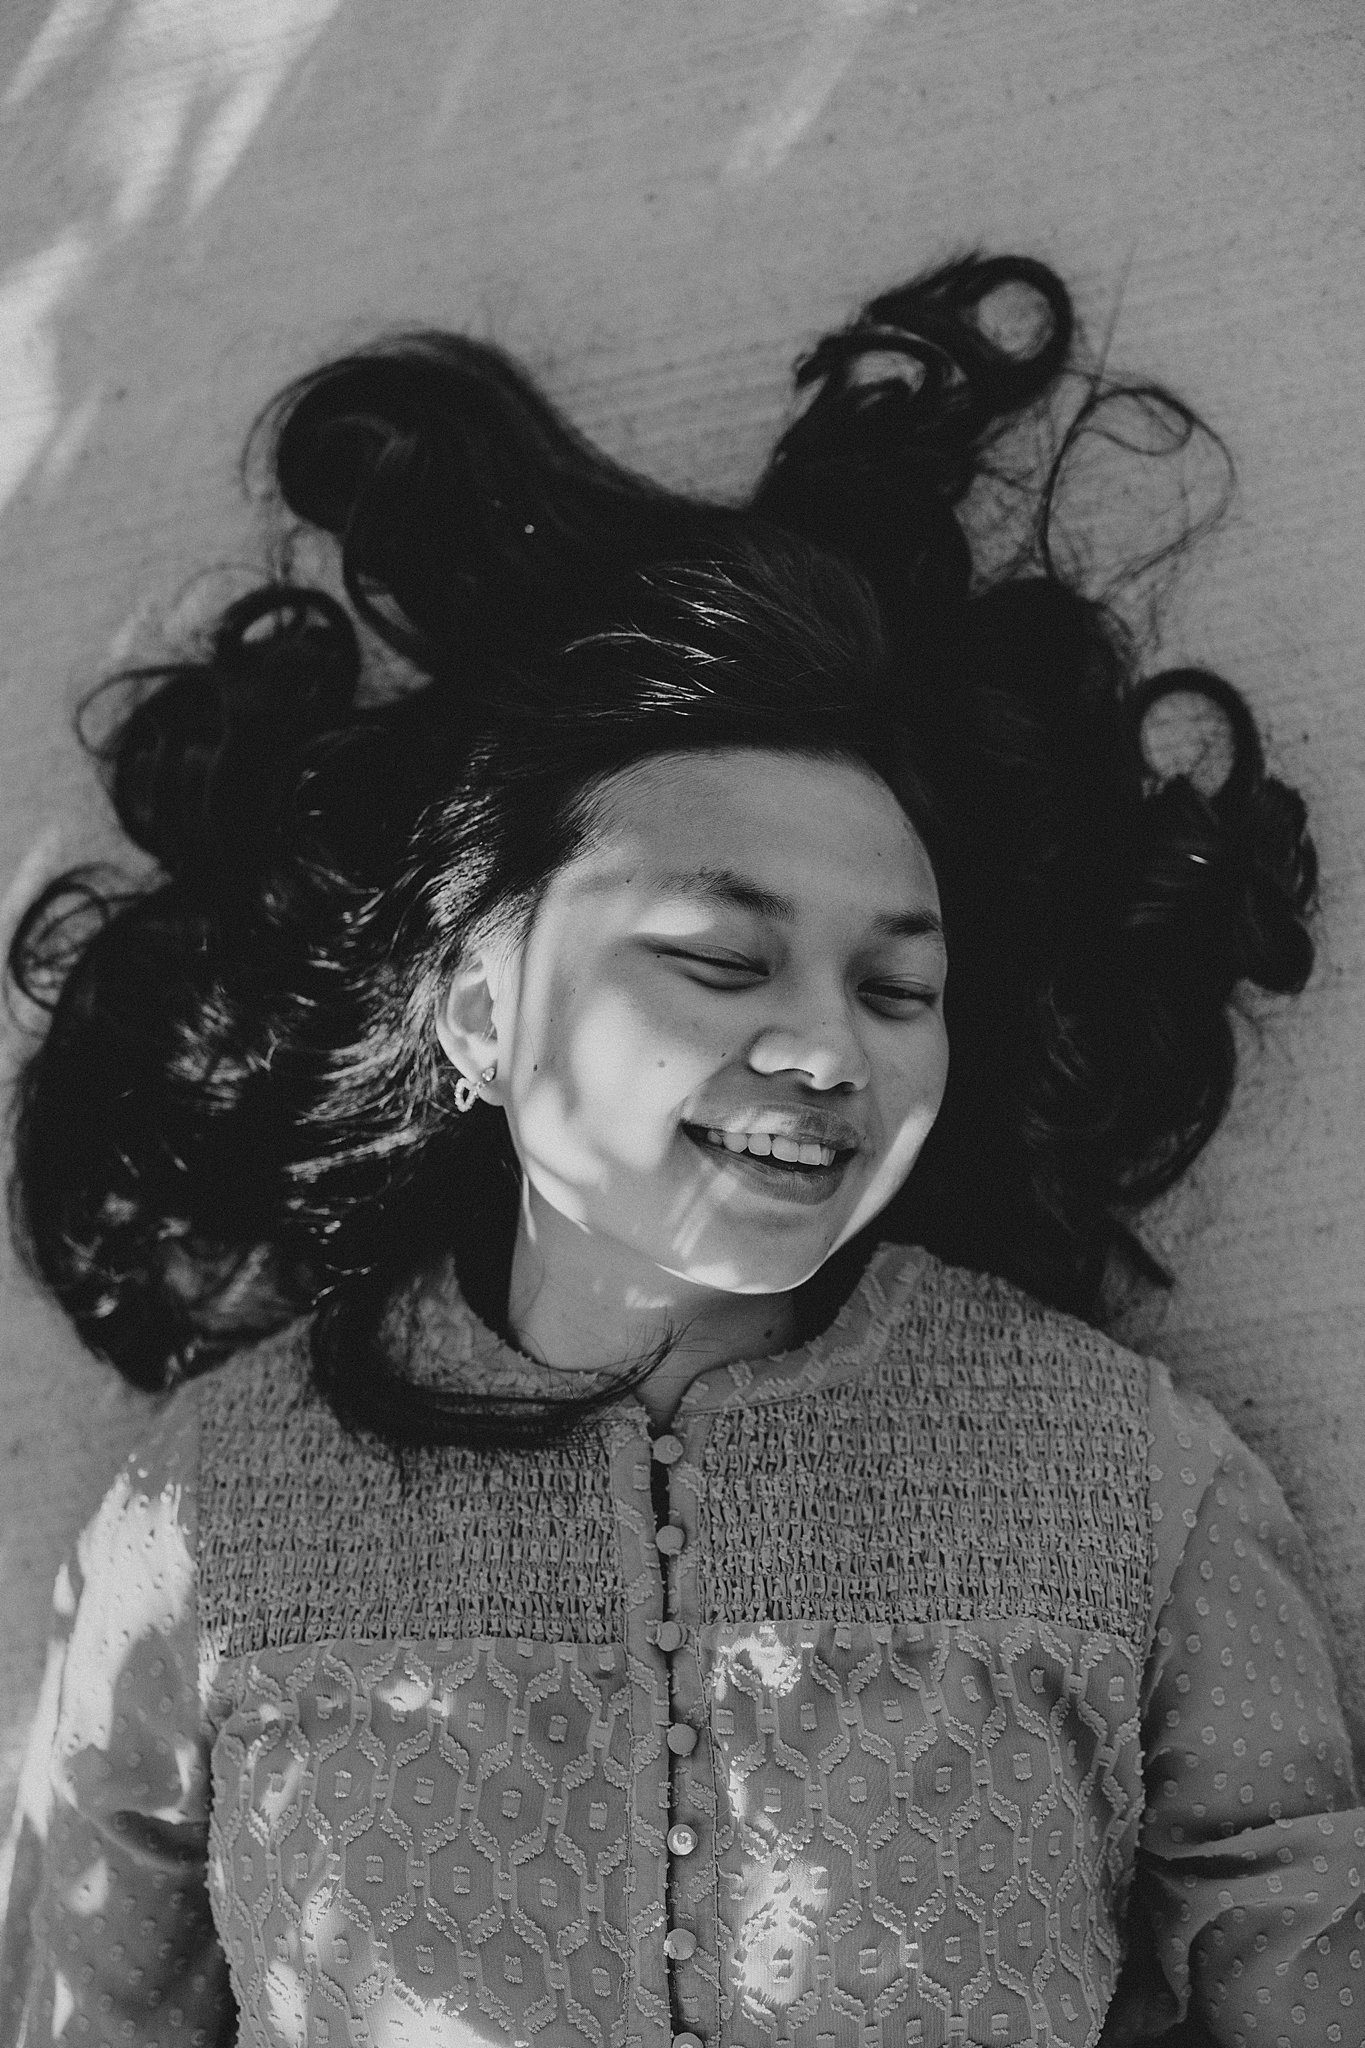 A girl with black hair laying on the ground is laughing. Light is coming through the area next to her casting interesting shadows on her face. 